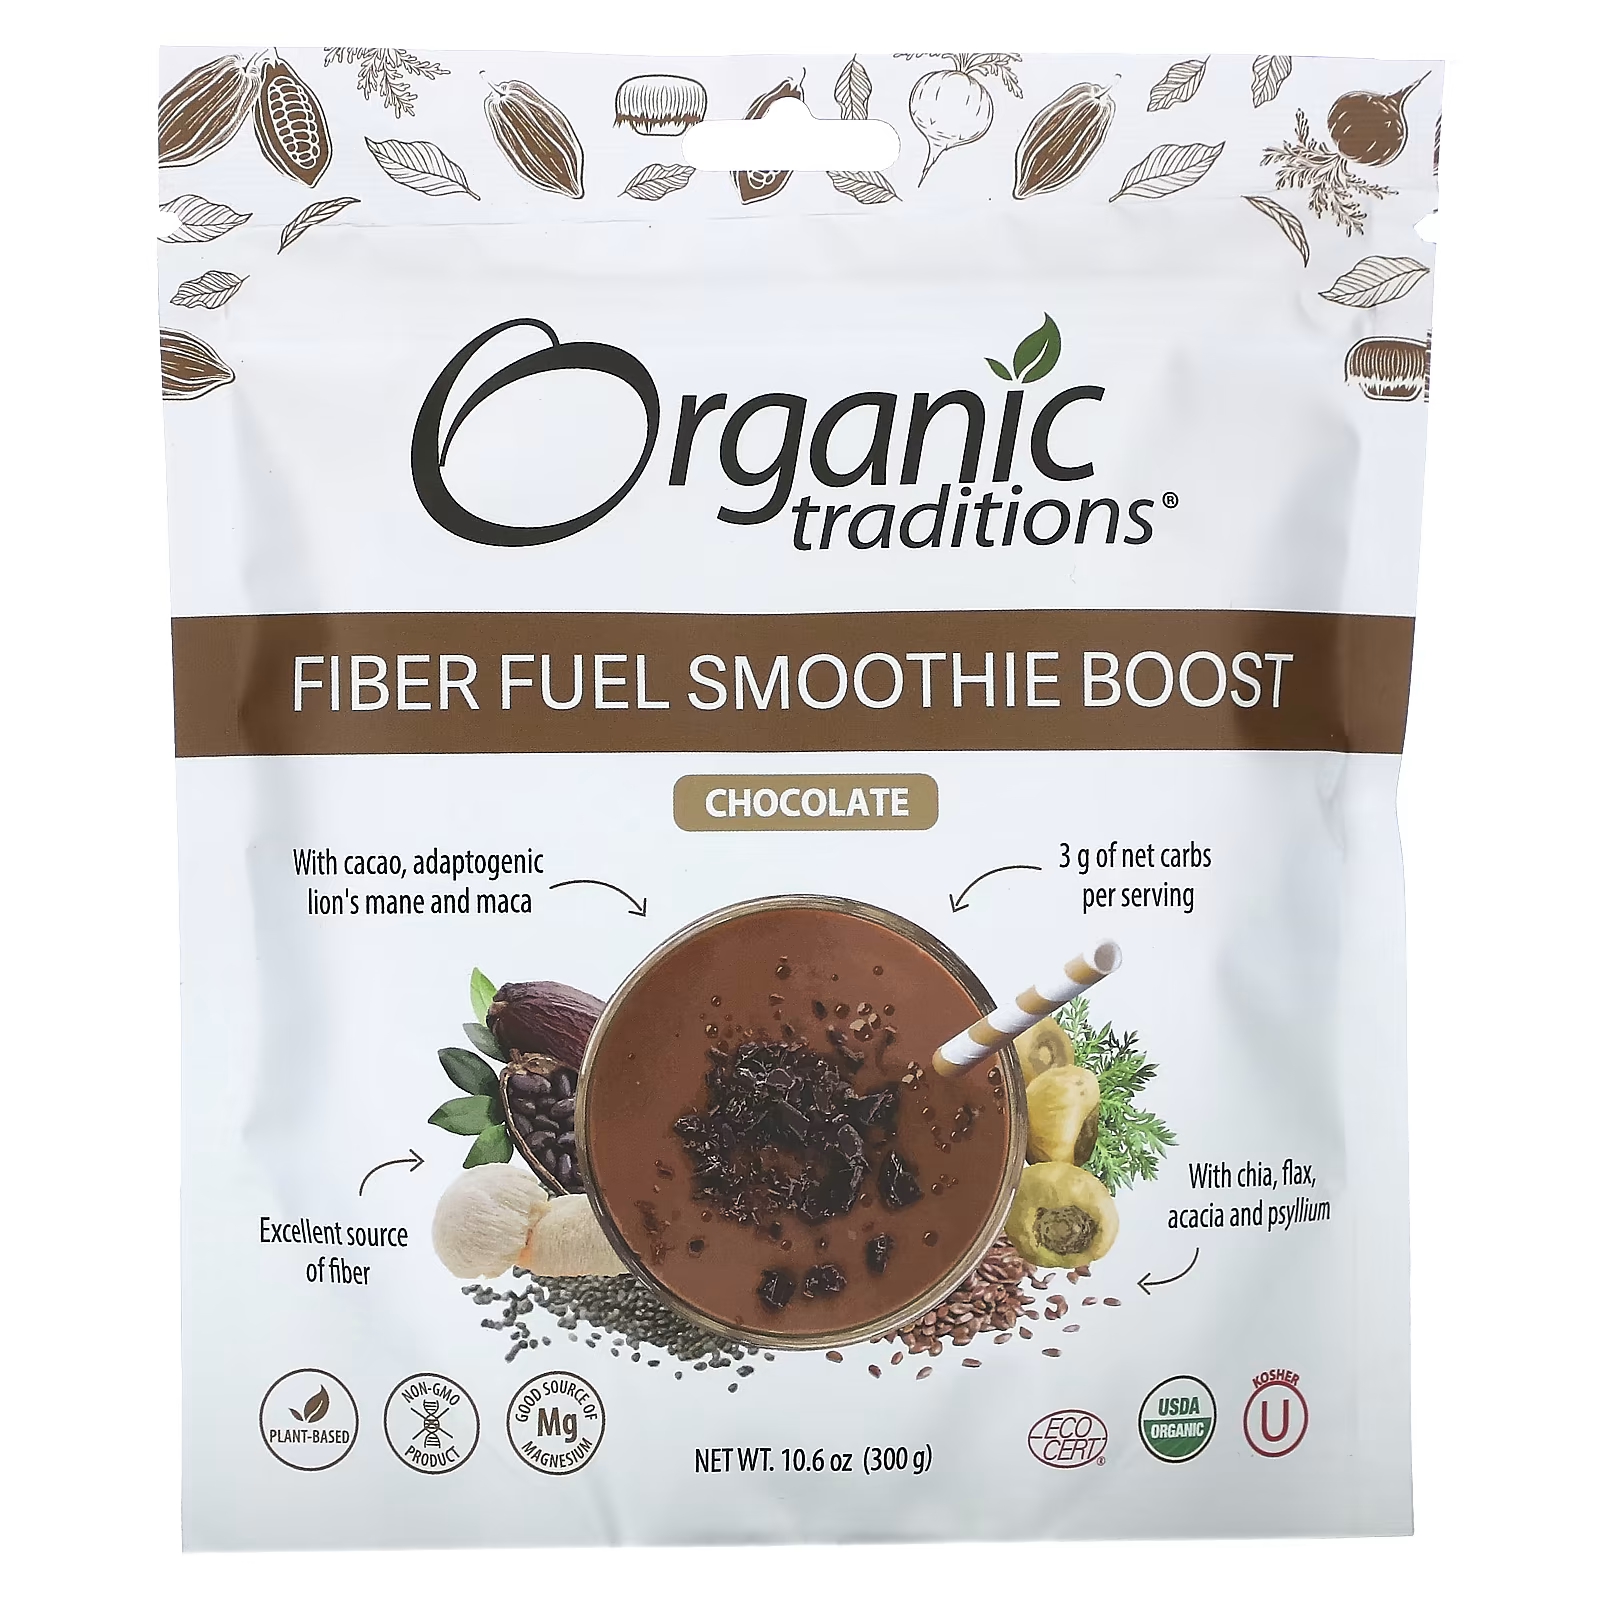 Organic Traditions Fiber Fuel Smoothie Boost Шоколад, 10,6 унций (300 г) organic traditions fiber fuel smoothie boost ягодный 300 г 10 6 унции